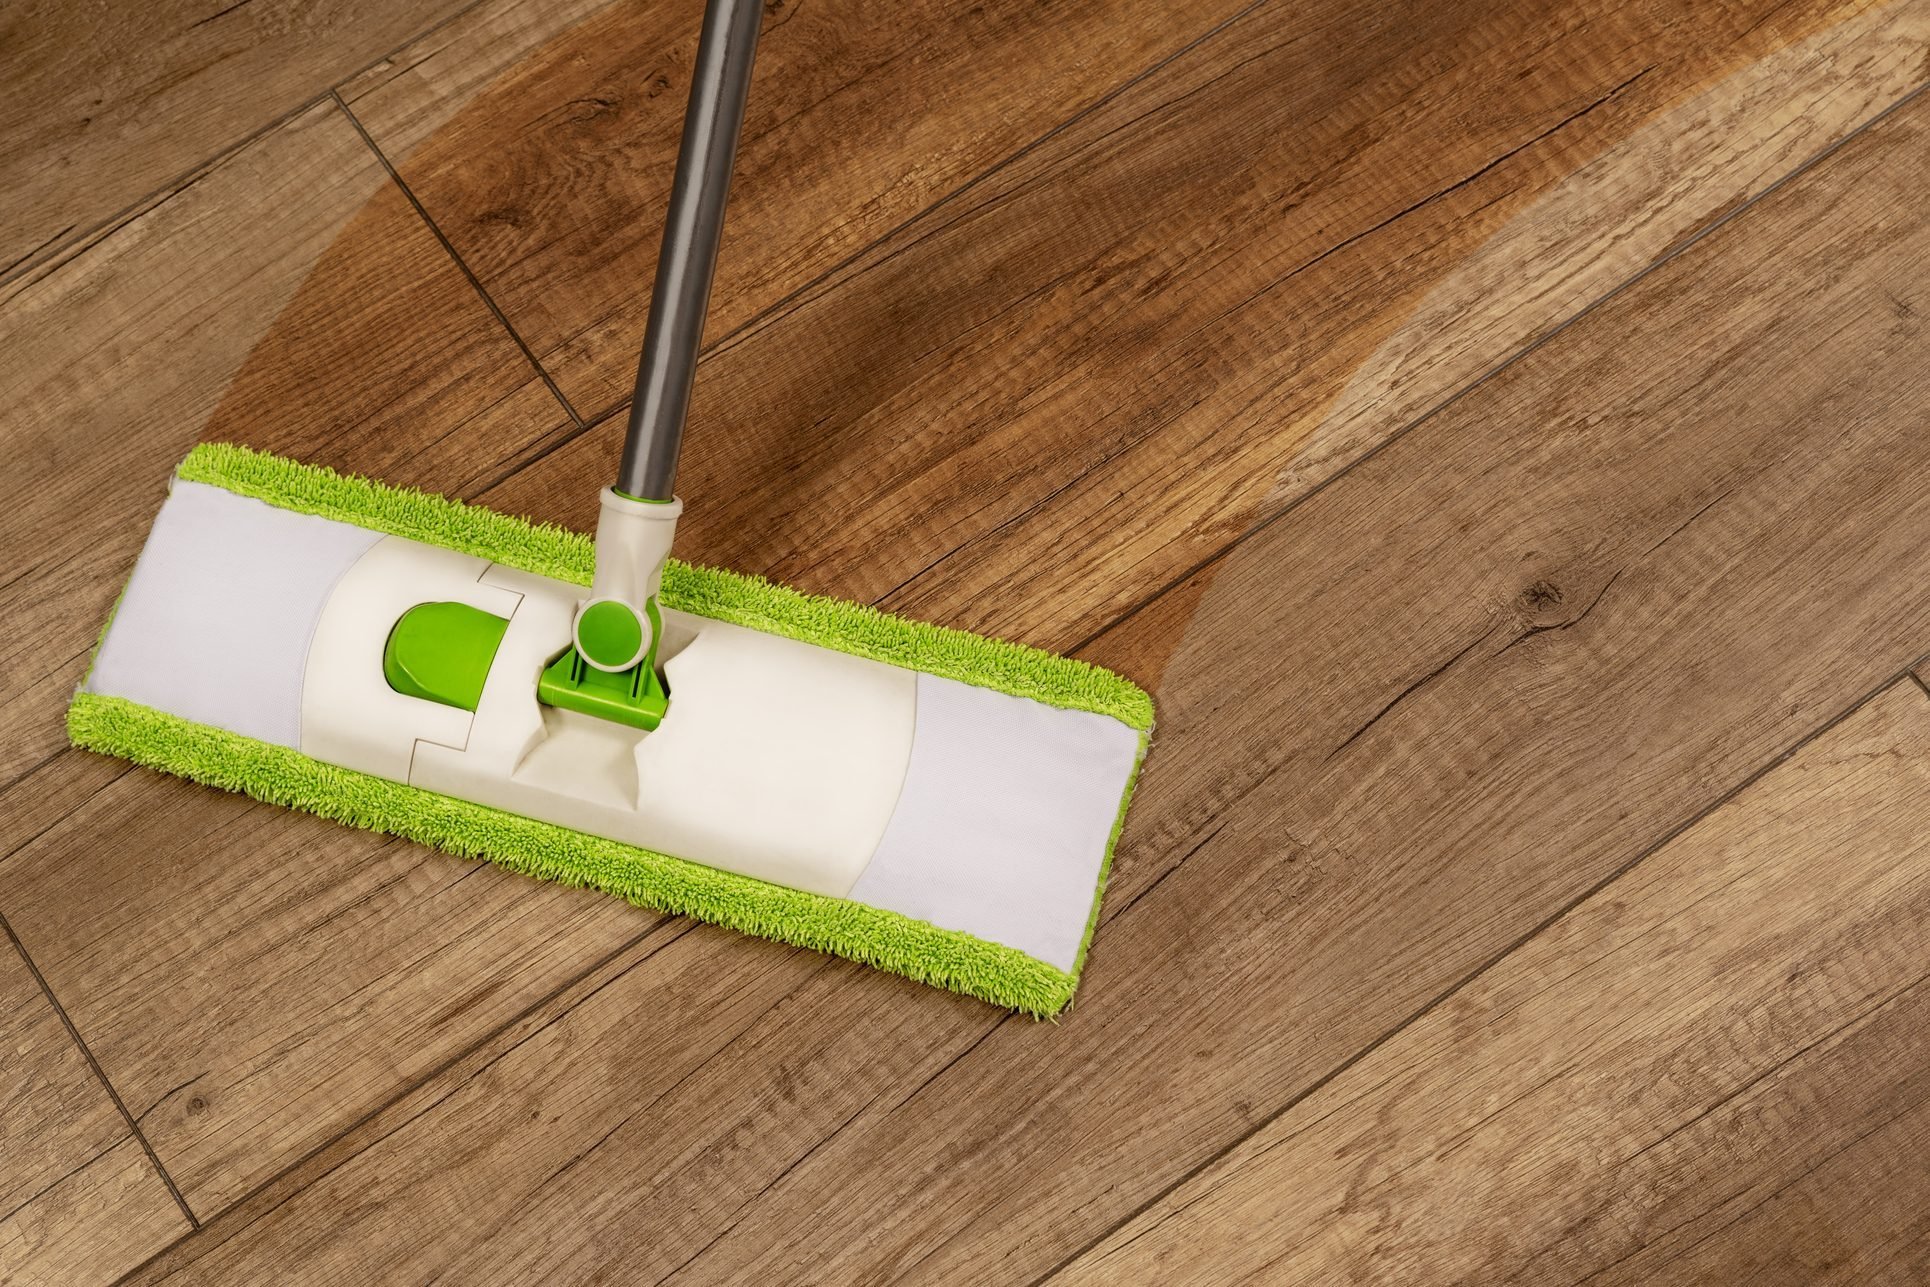 Best Mop For Laminate Floors: Tried and Tested